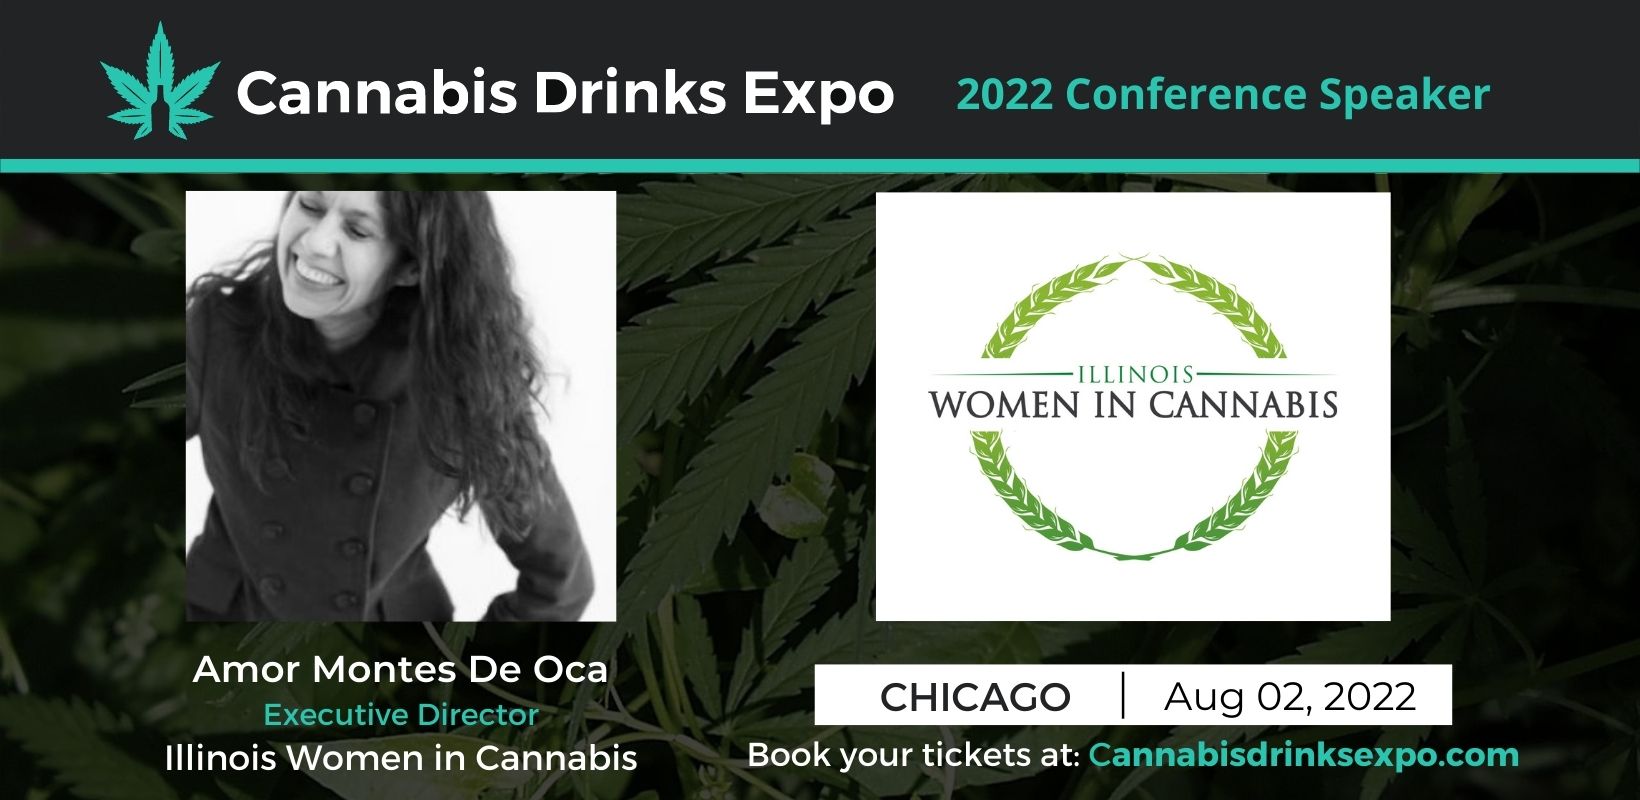 Photo for: Amor Montes De Oca, Executive Director at Illinois Women in Cannabis to speak at CDE 2022.